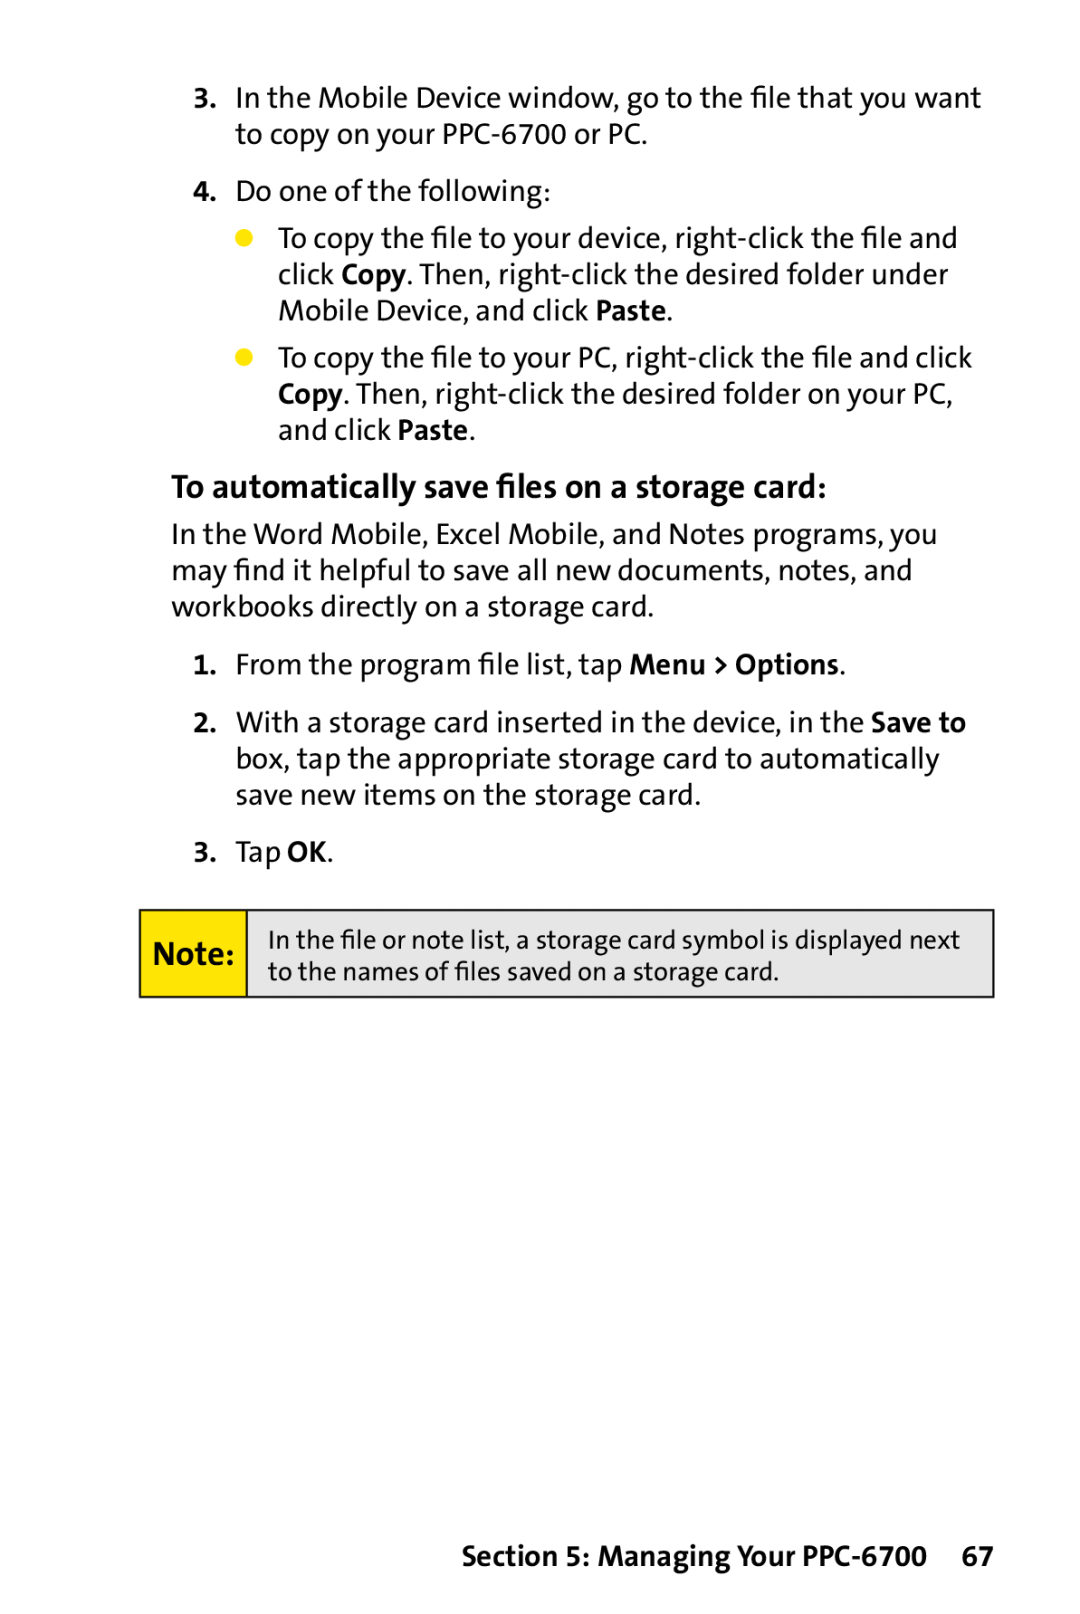 Sprint Nextel manual To automatically save ﬁles on a storage card, Managing Your PPC-6700 